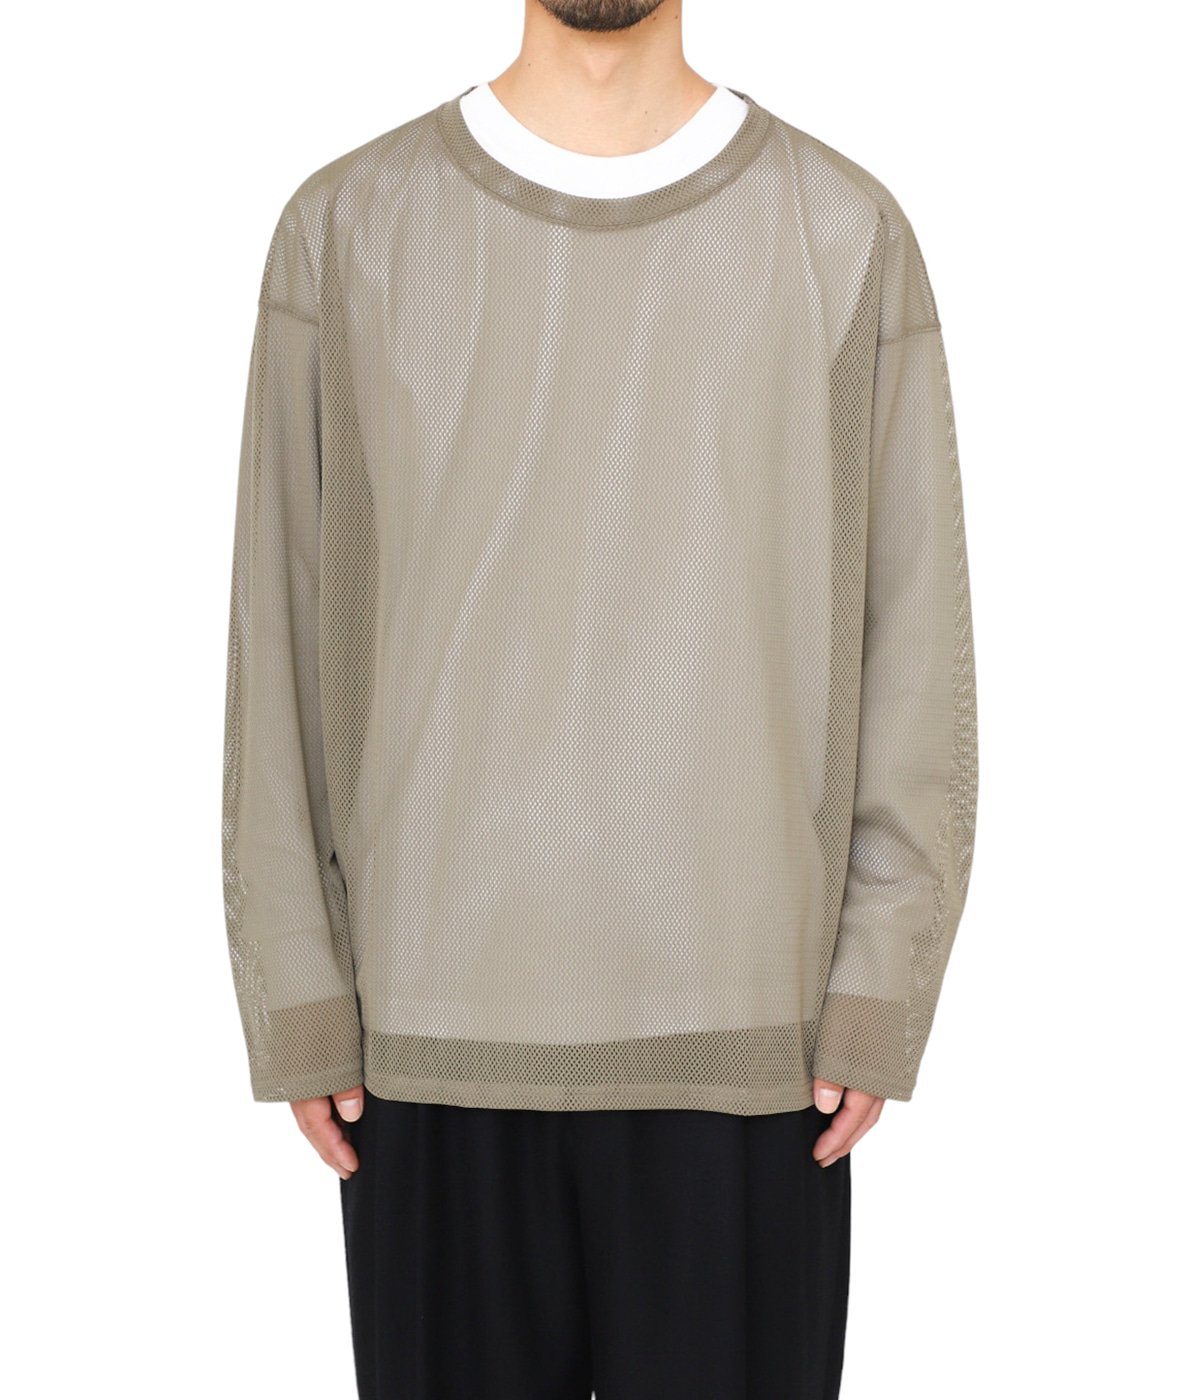 S.S. Crew Neck Shirt - Knit Mesh | South2 West8(サウスツーウエスト